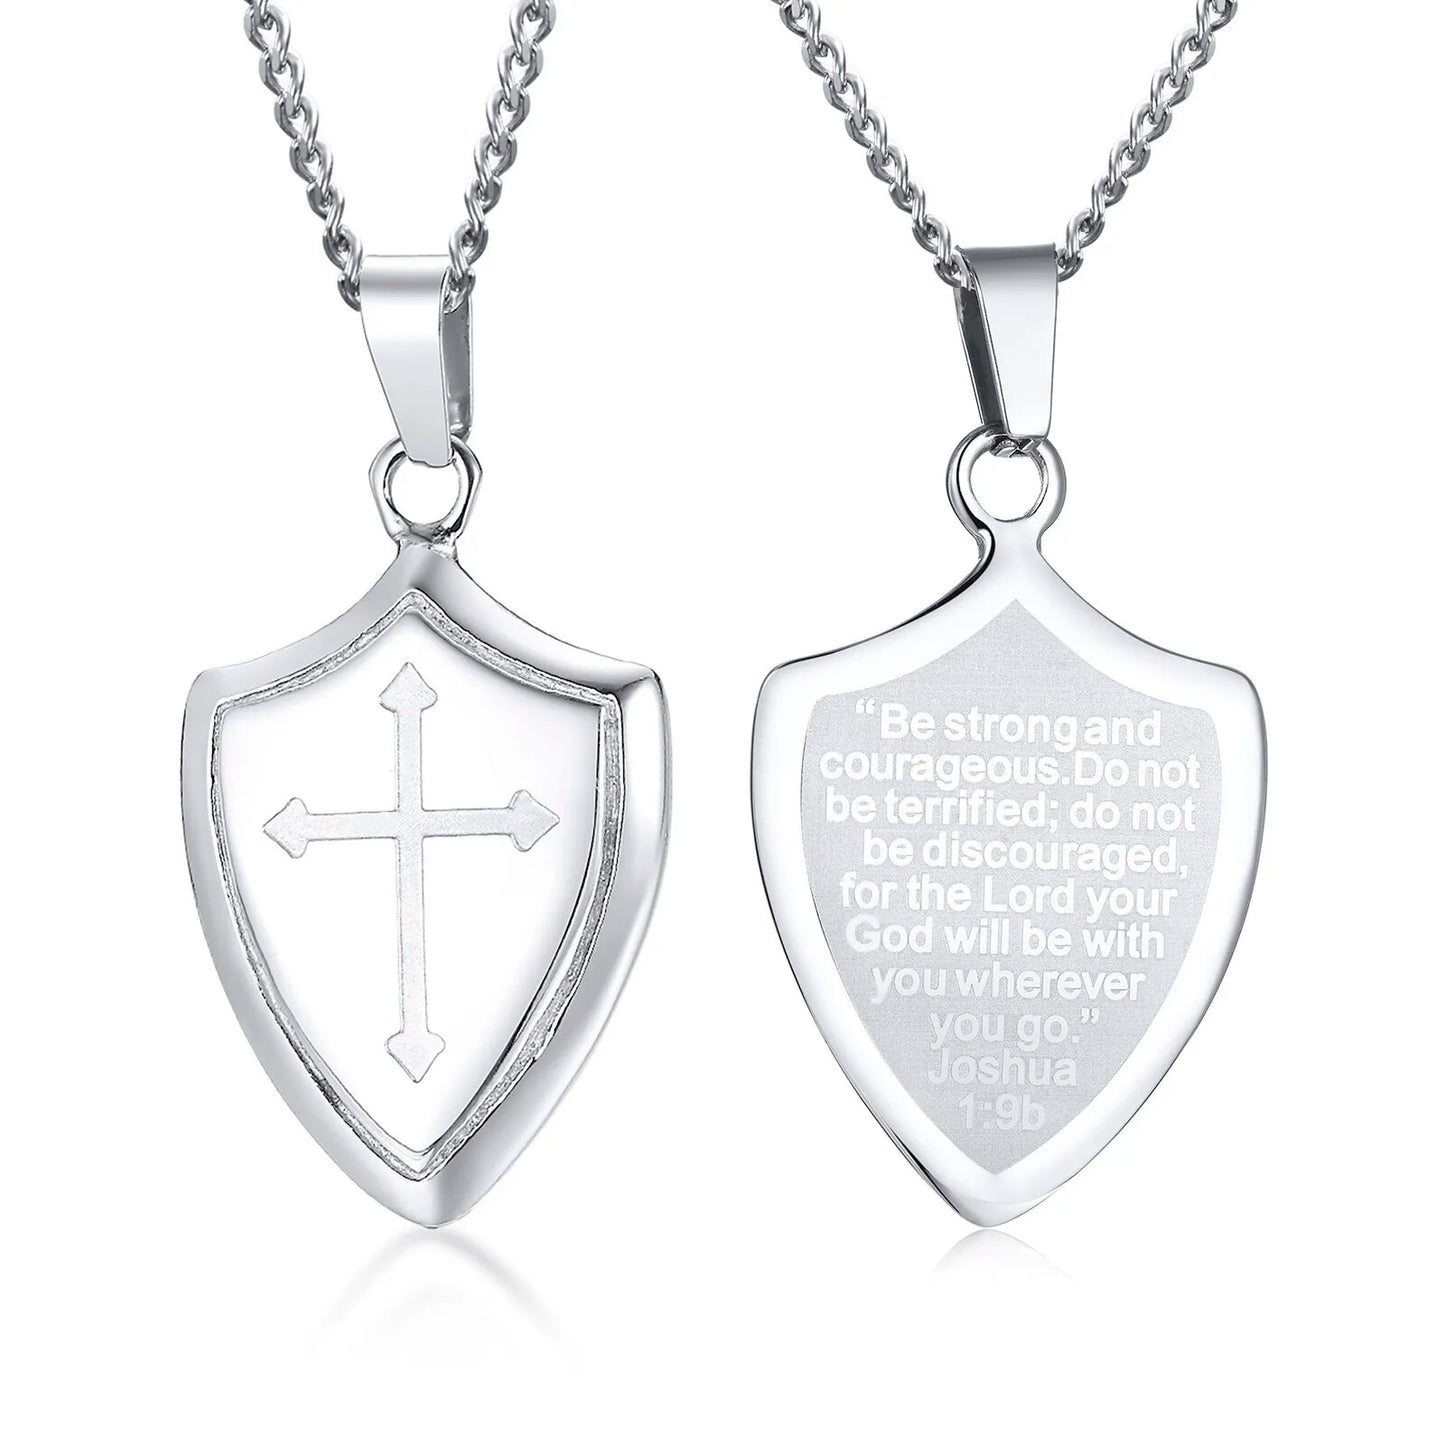 Men Shield Shape Cross Pendant Necklace in Stainless Steel Be Strong and Courageous Bible Verse Christian Jewelry